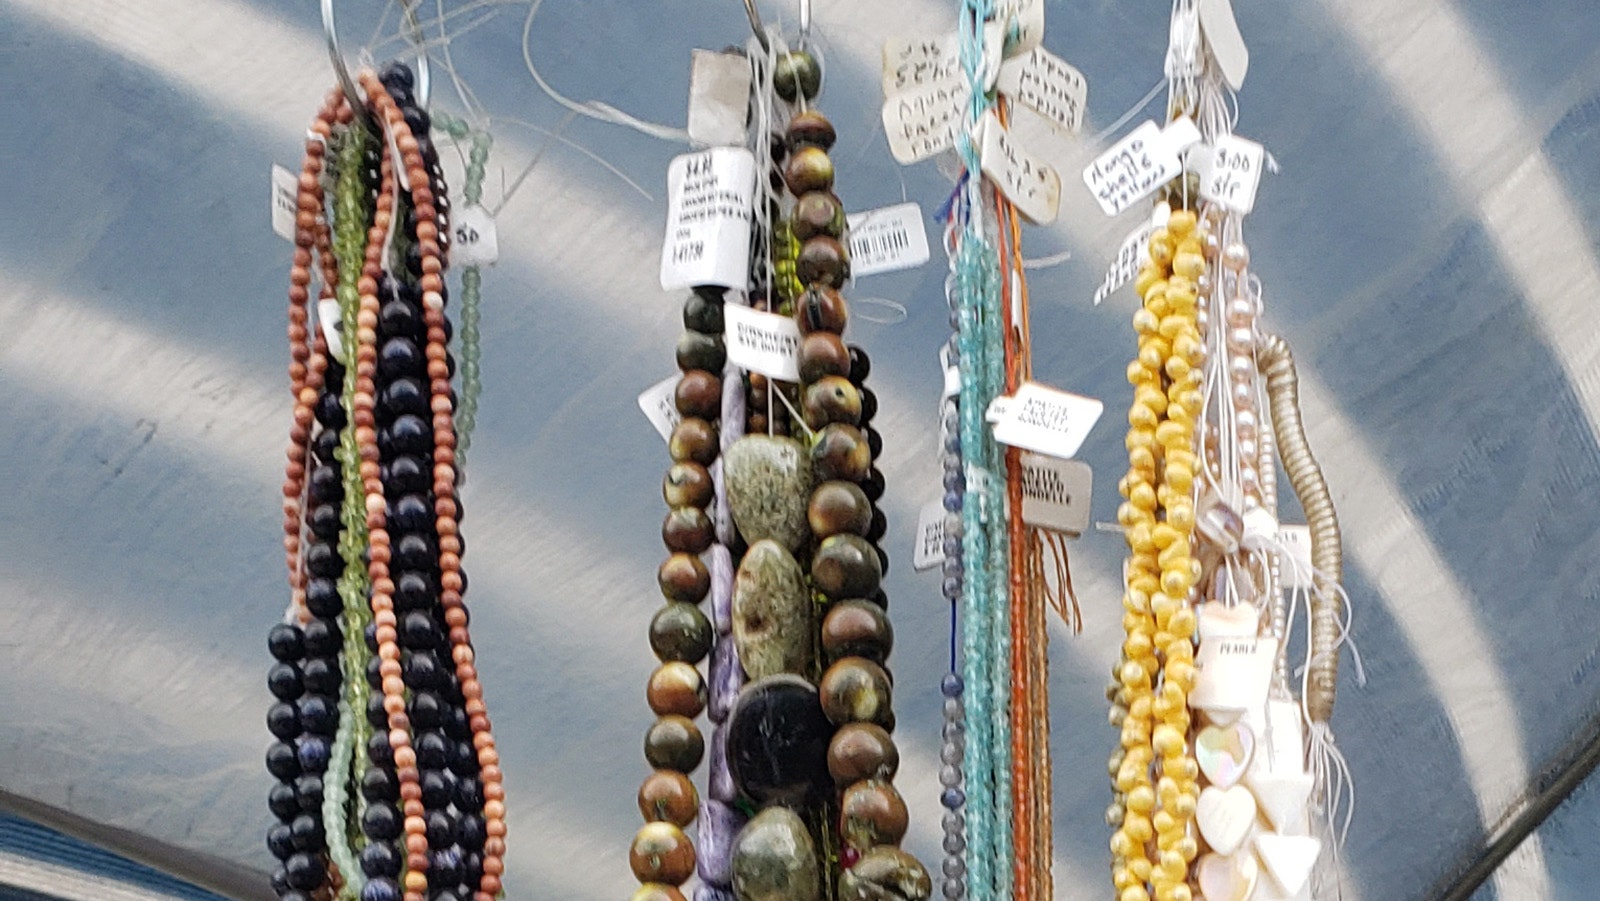 Sheryl McLaughlin has a wide array of beads available for projects, but has been thinking of paring back on the collection to focus on some of the more intricate projects she's got in mind for the next phase of her work.